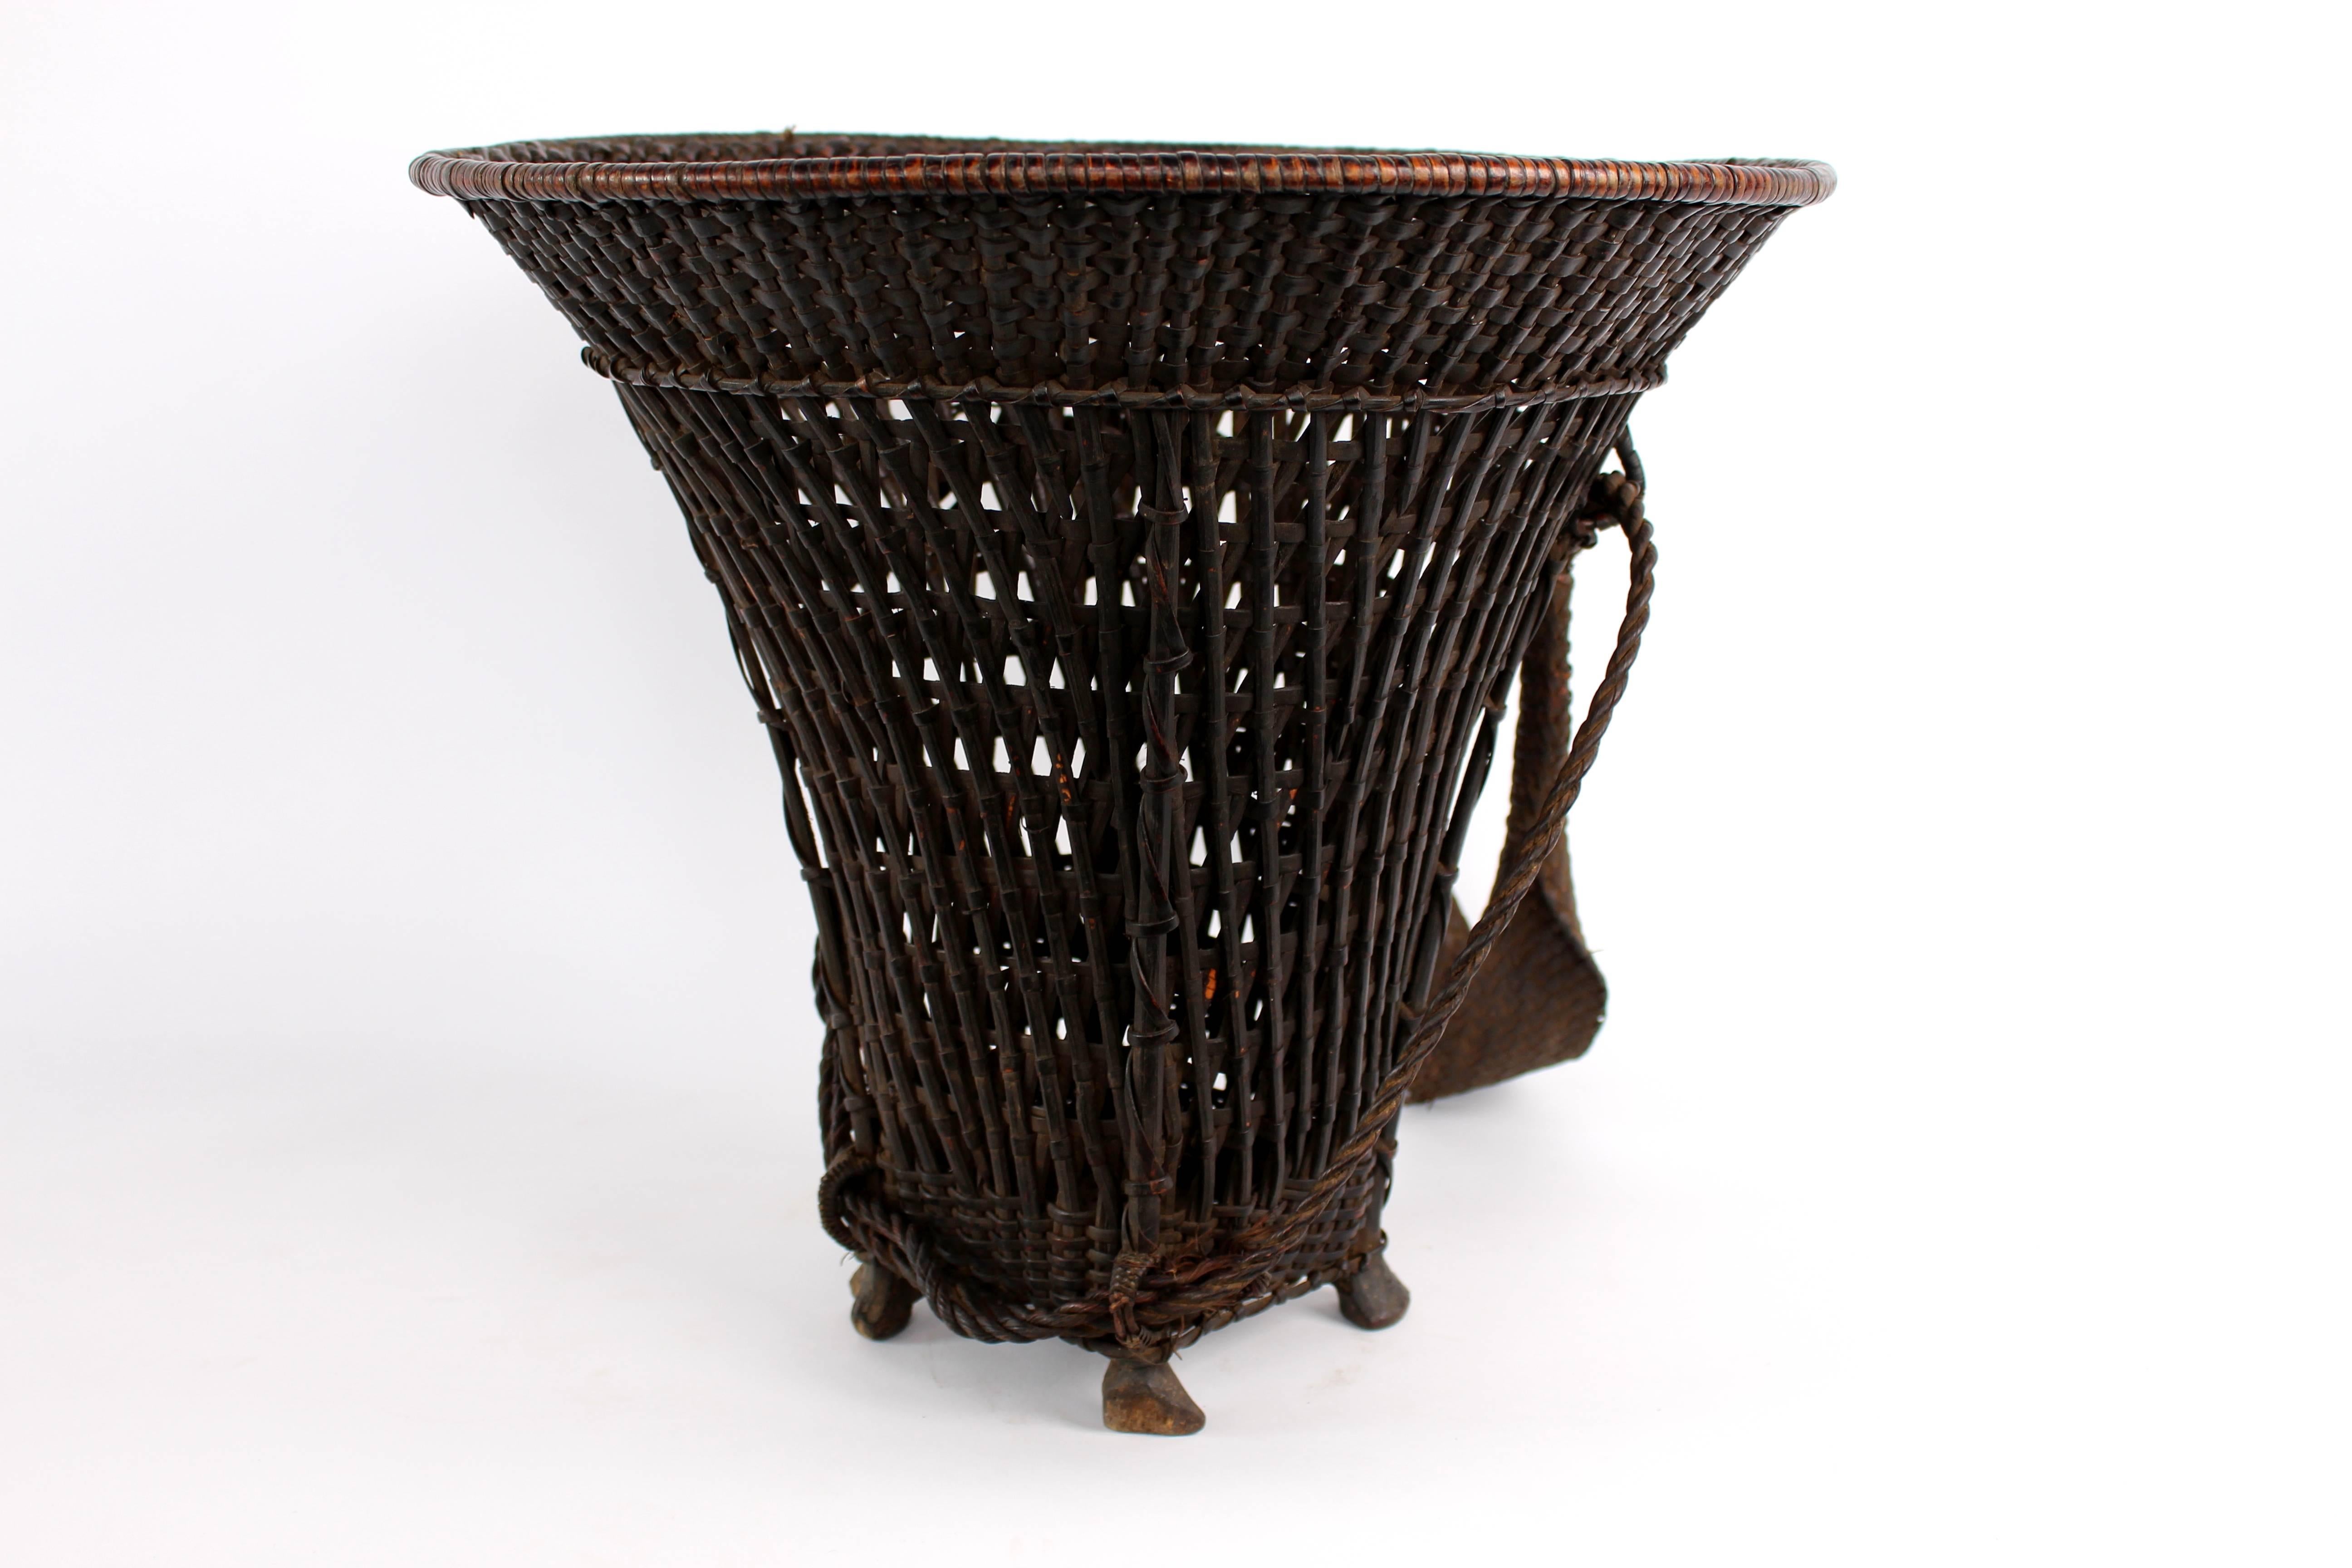 Baskets were used for the transportation and storage of foodstuffs. Wide brim baskets like this, with open weaving were typically used for fishing expeditions. The added strap with loop at the end is for carrying—the strap would be placed around the